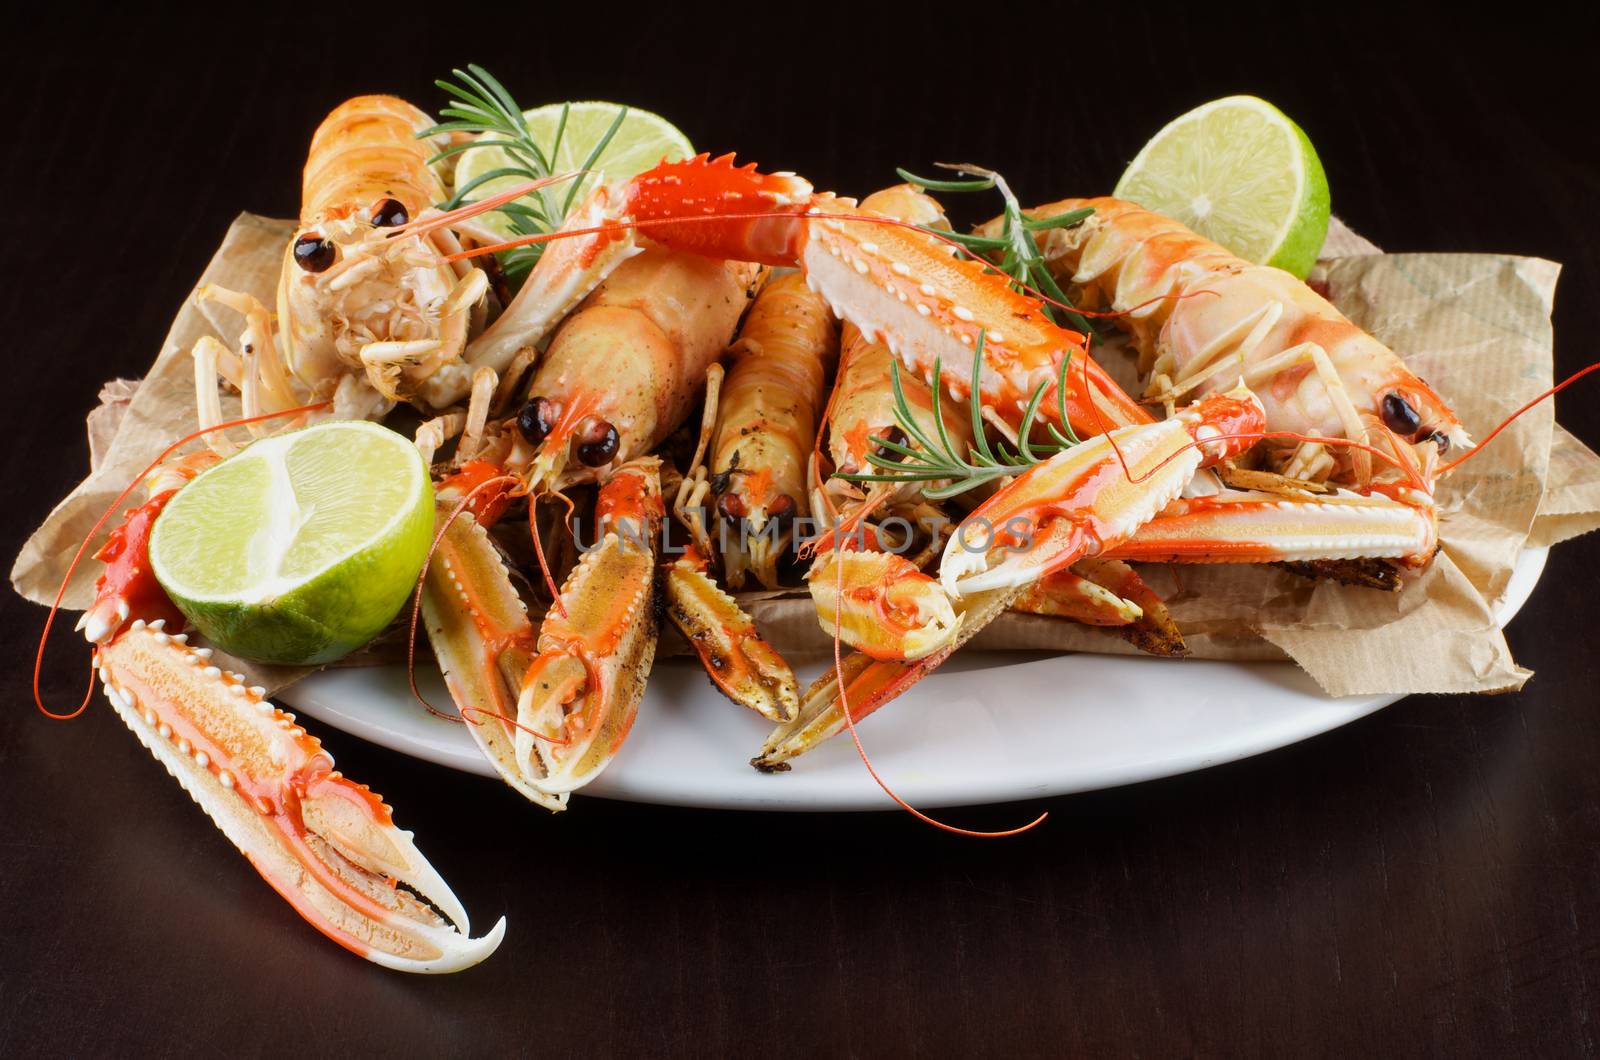 Delicious Grilled Langoustines with Lime and Rosemary on White Plate closeup on Dark Wooden background